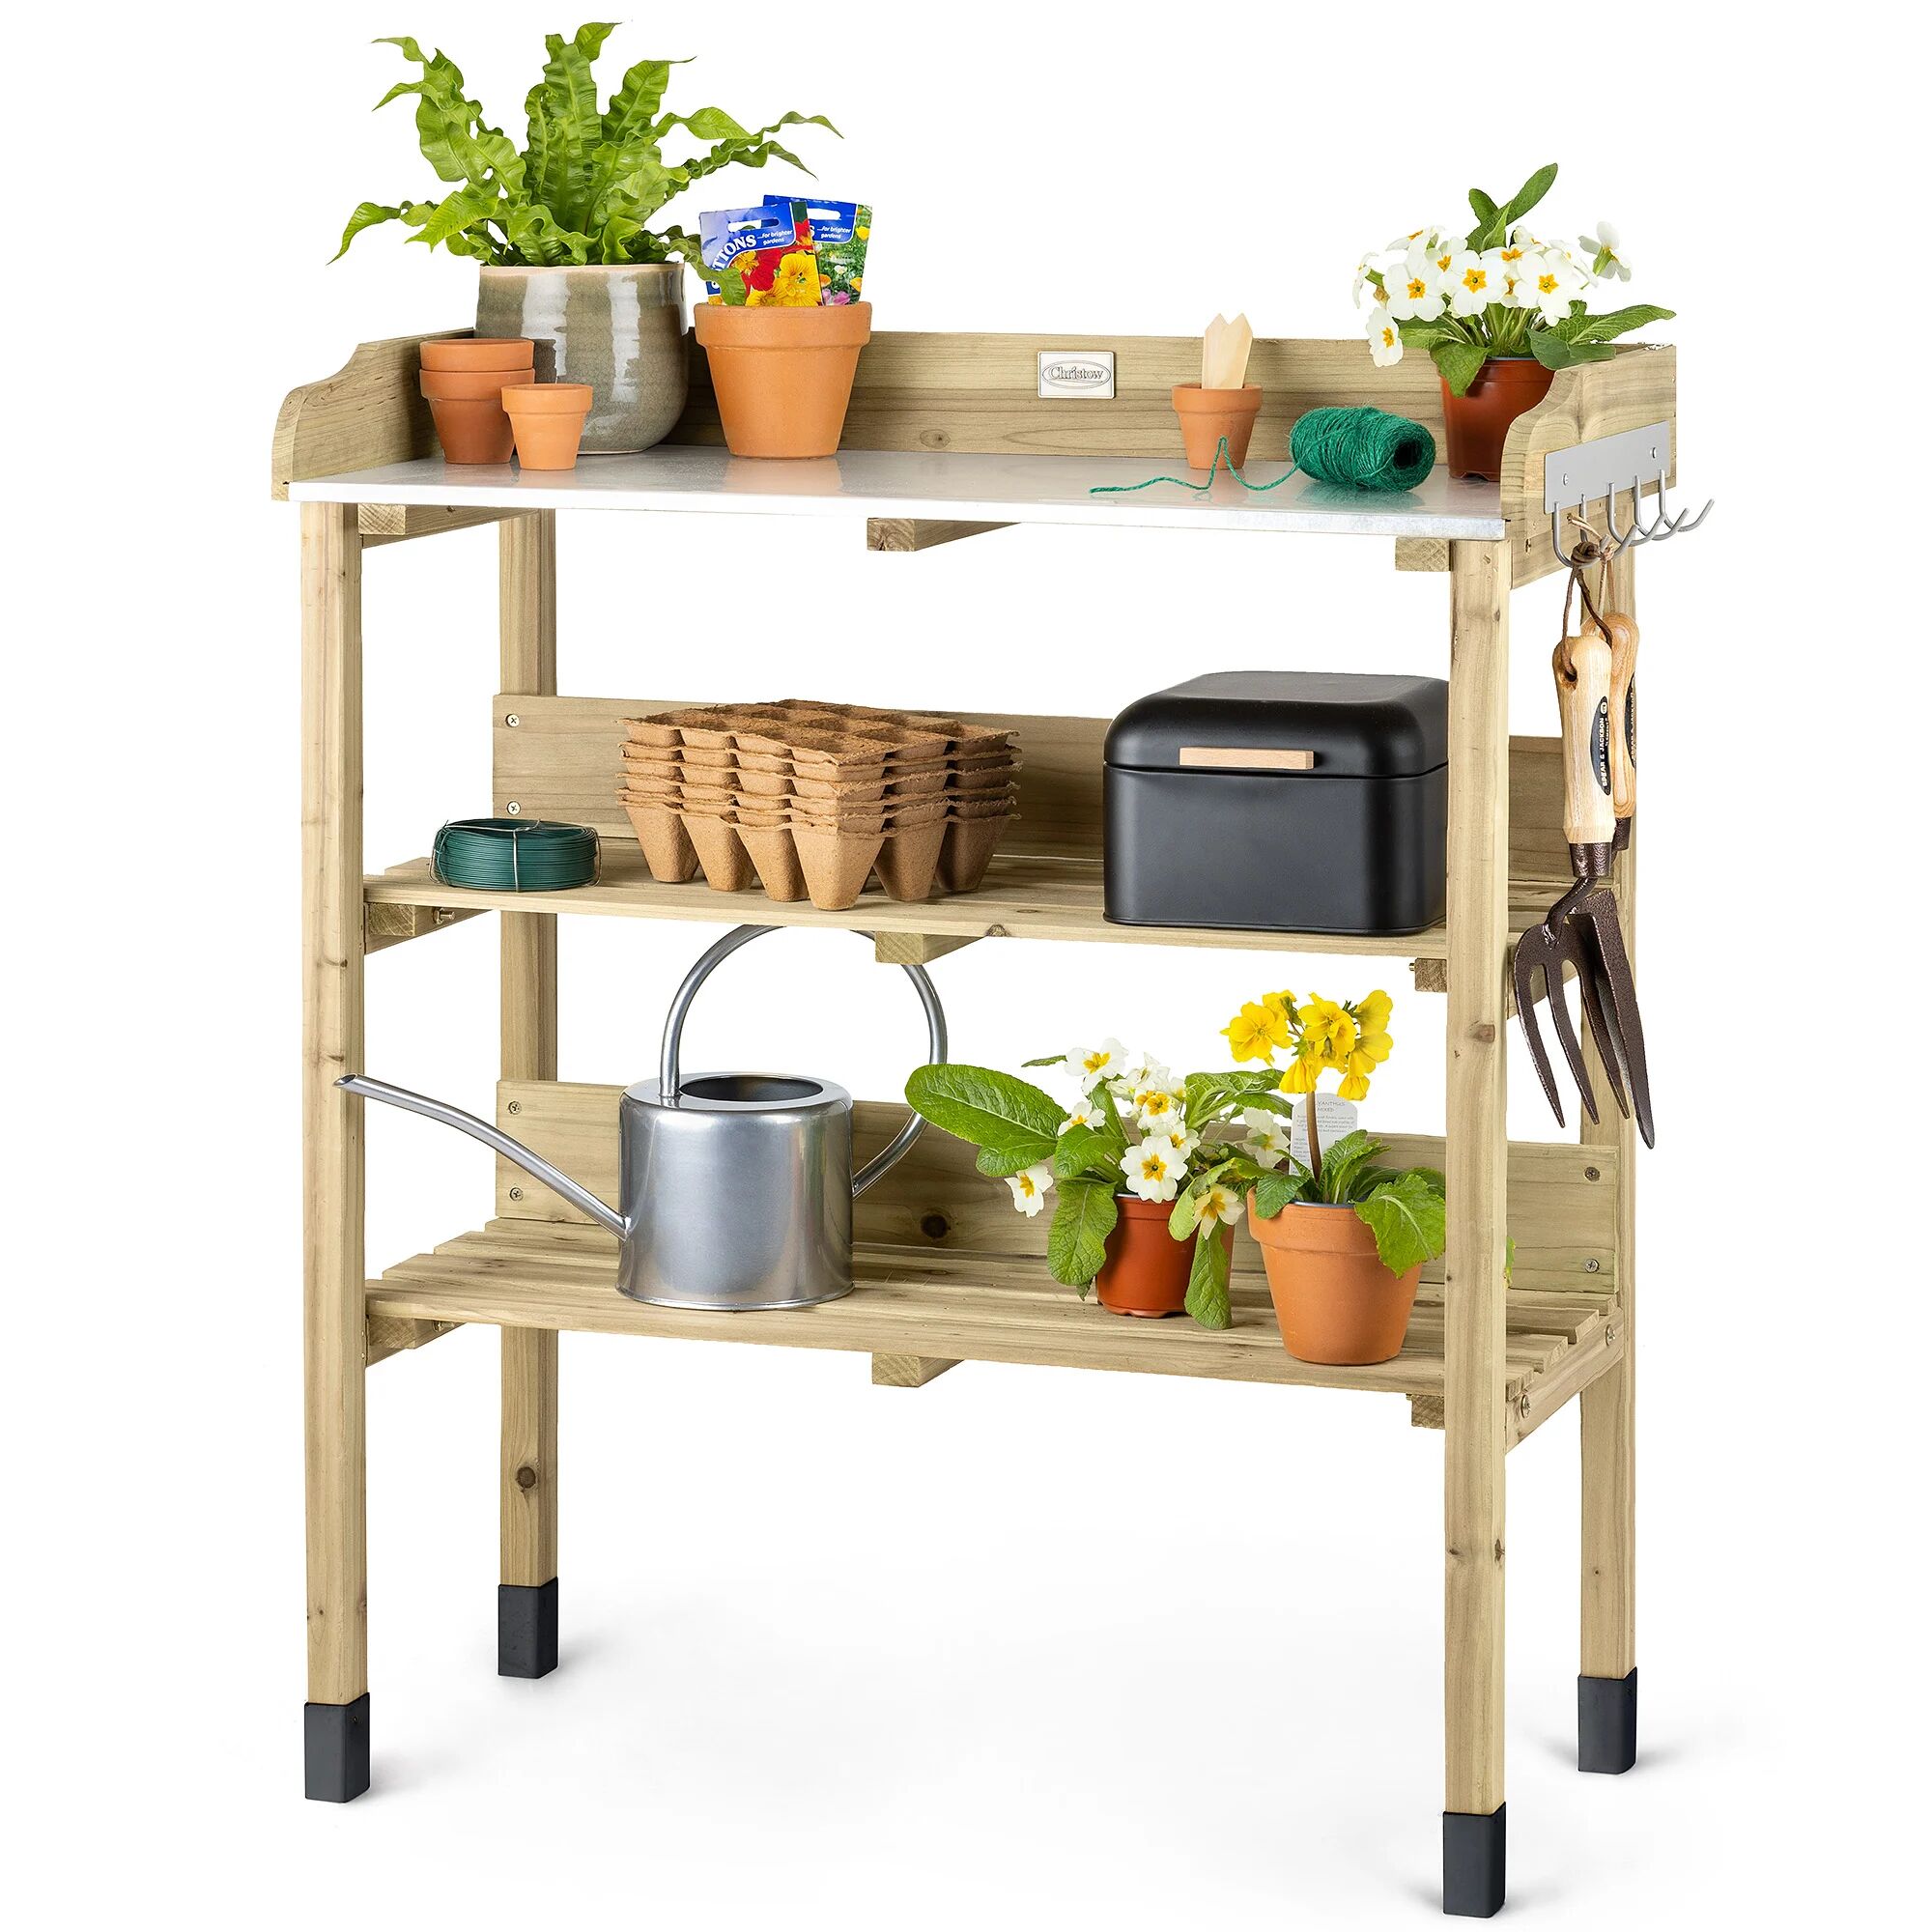 Christow Wooden Potting Table With Storage - Natural Wood